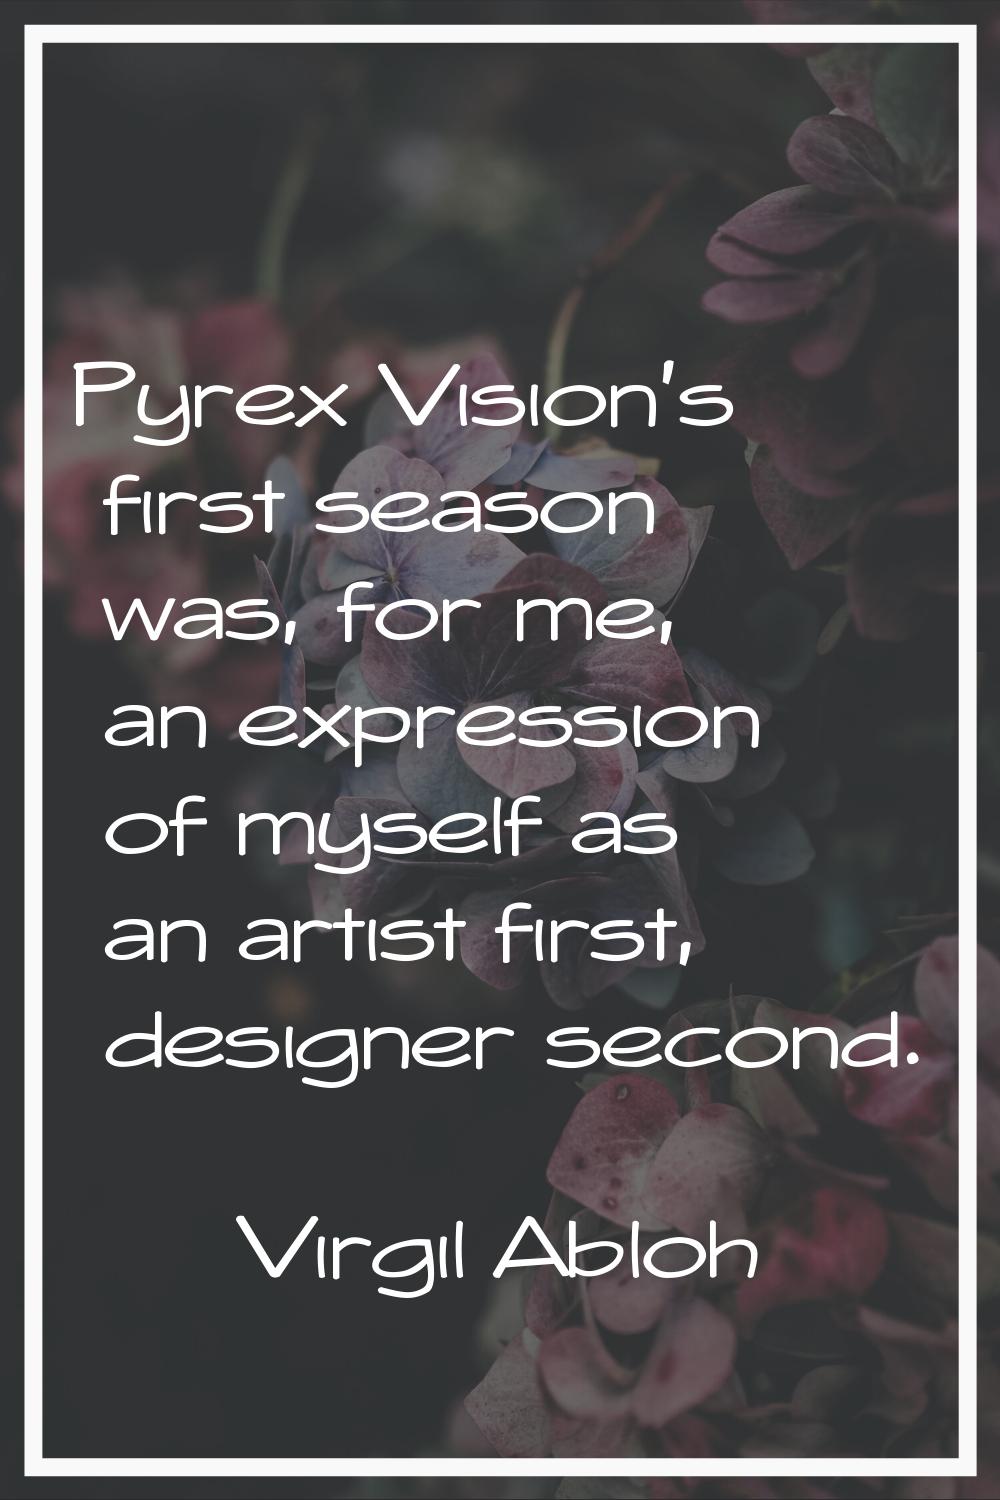 Pyrex Vision's first season was, for me, an expression of myself as an artist first, designer secon